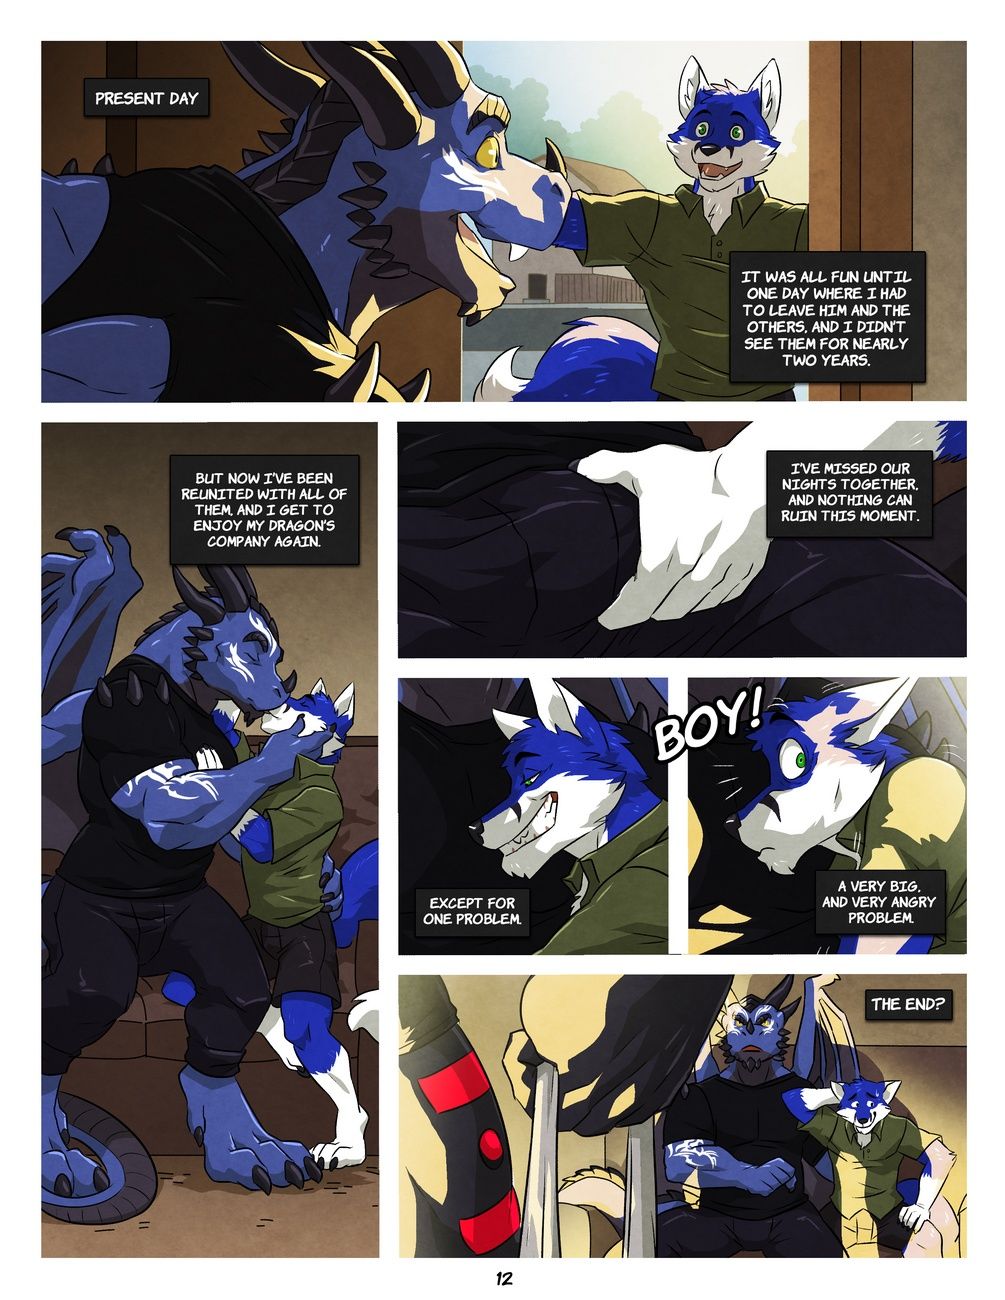 Black And Blue 2 page 1